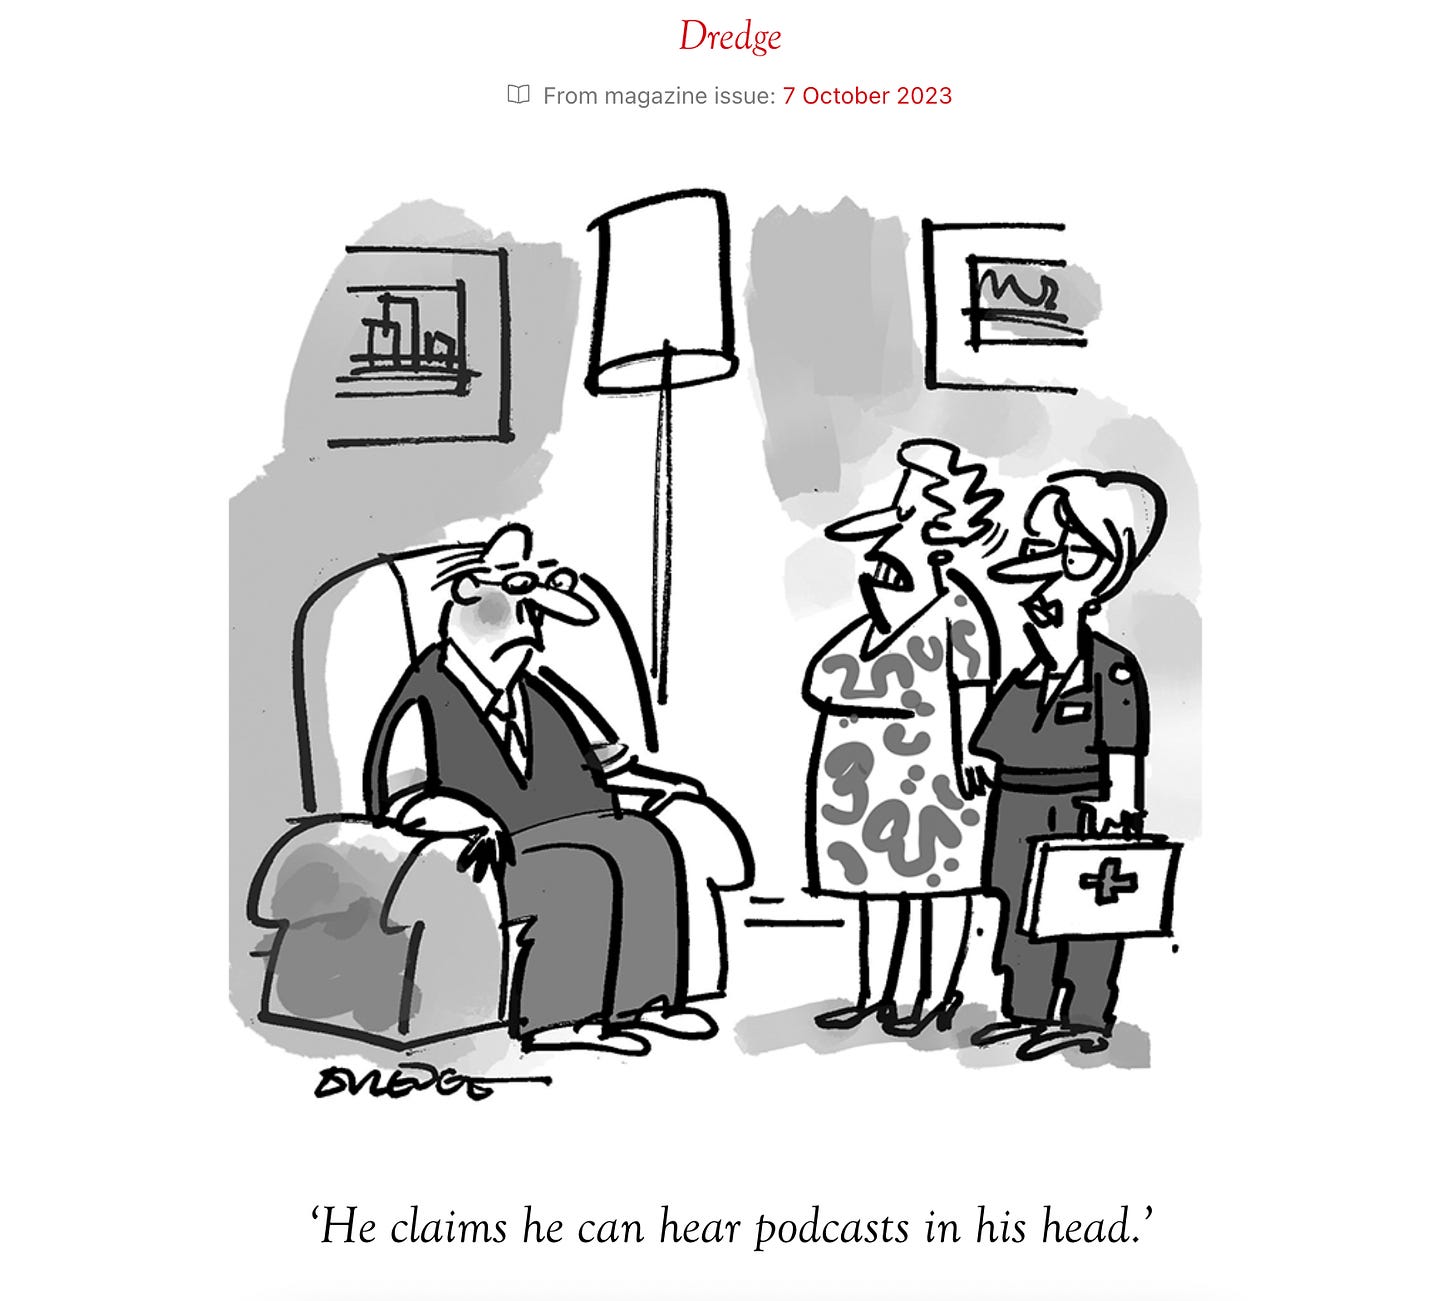 A cartoon of a man in a chair, with a woman explaining to a doctor "he claims he can hear podcasts in his head".